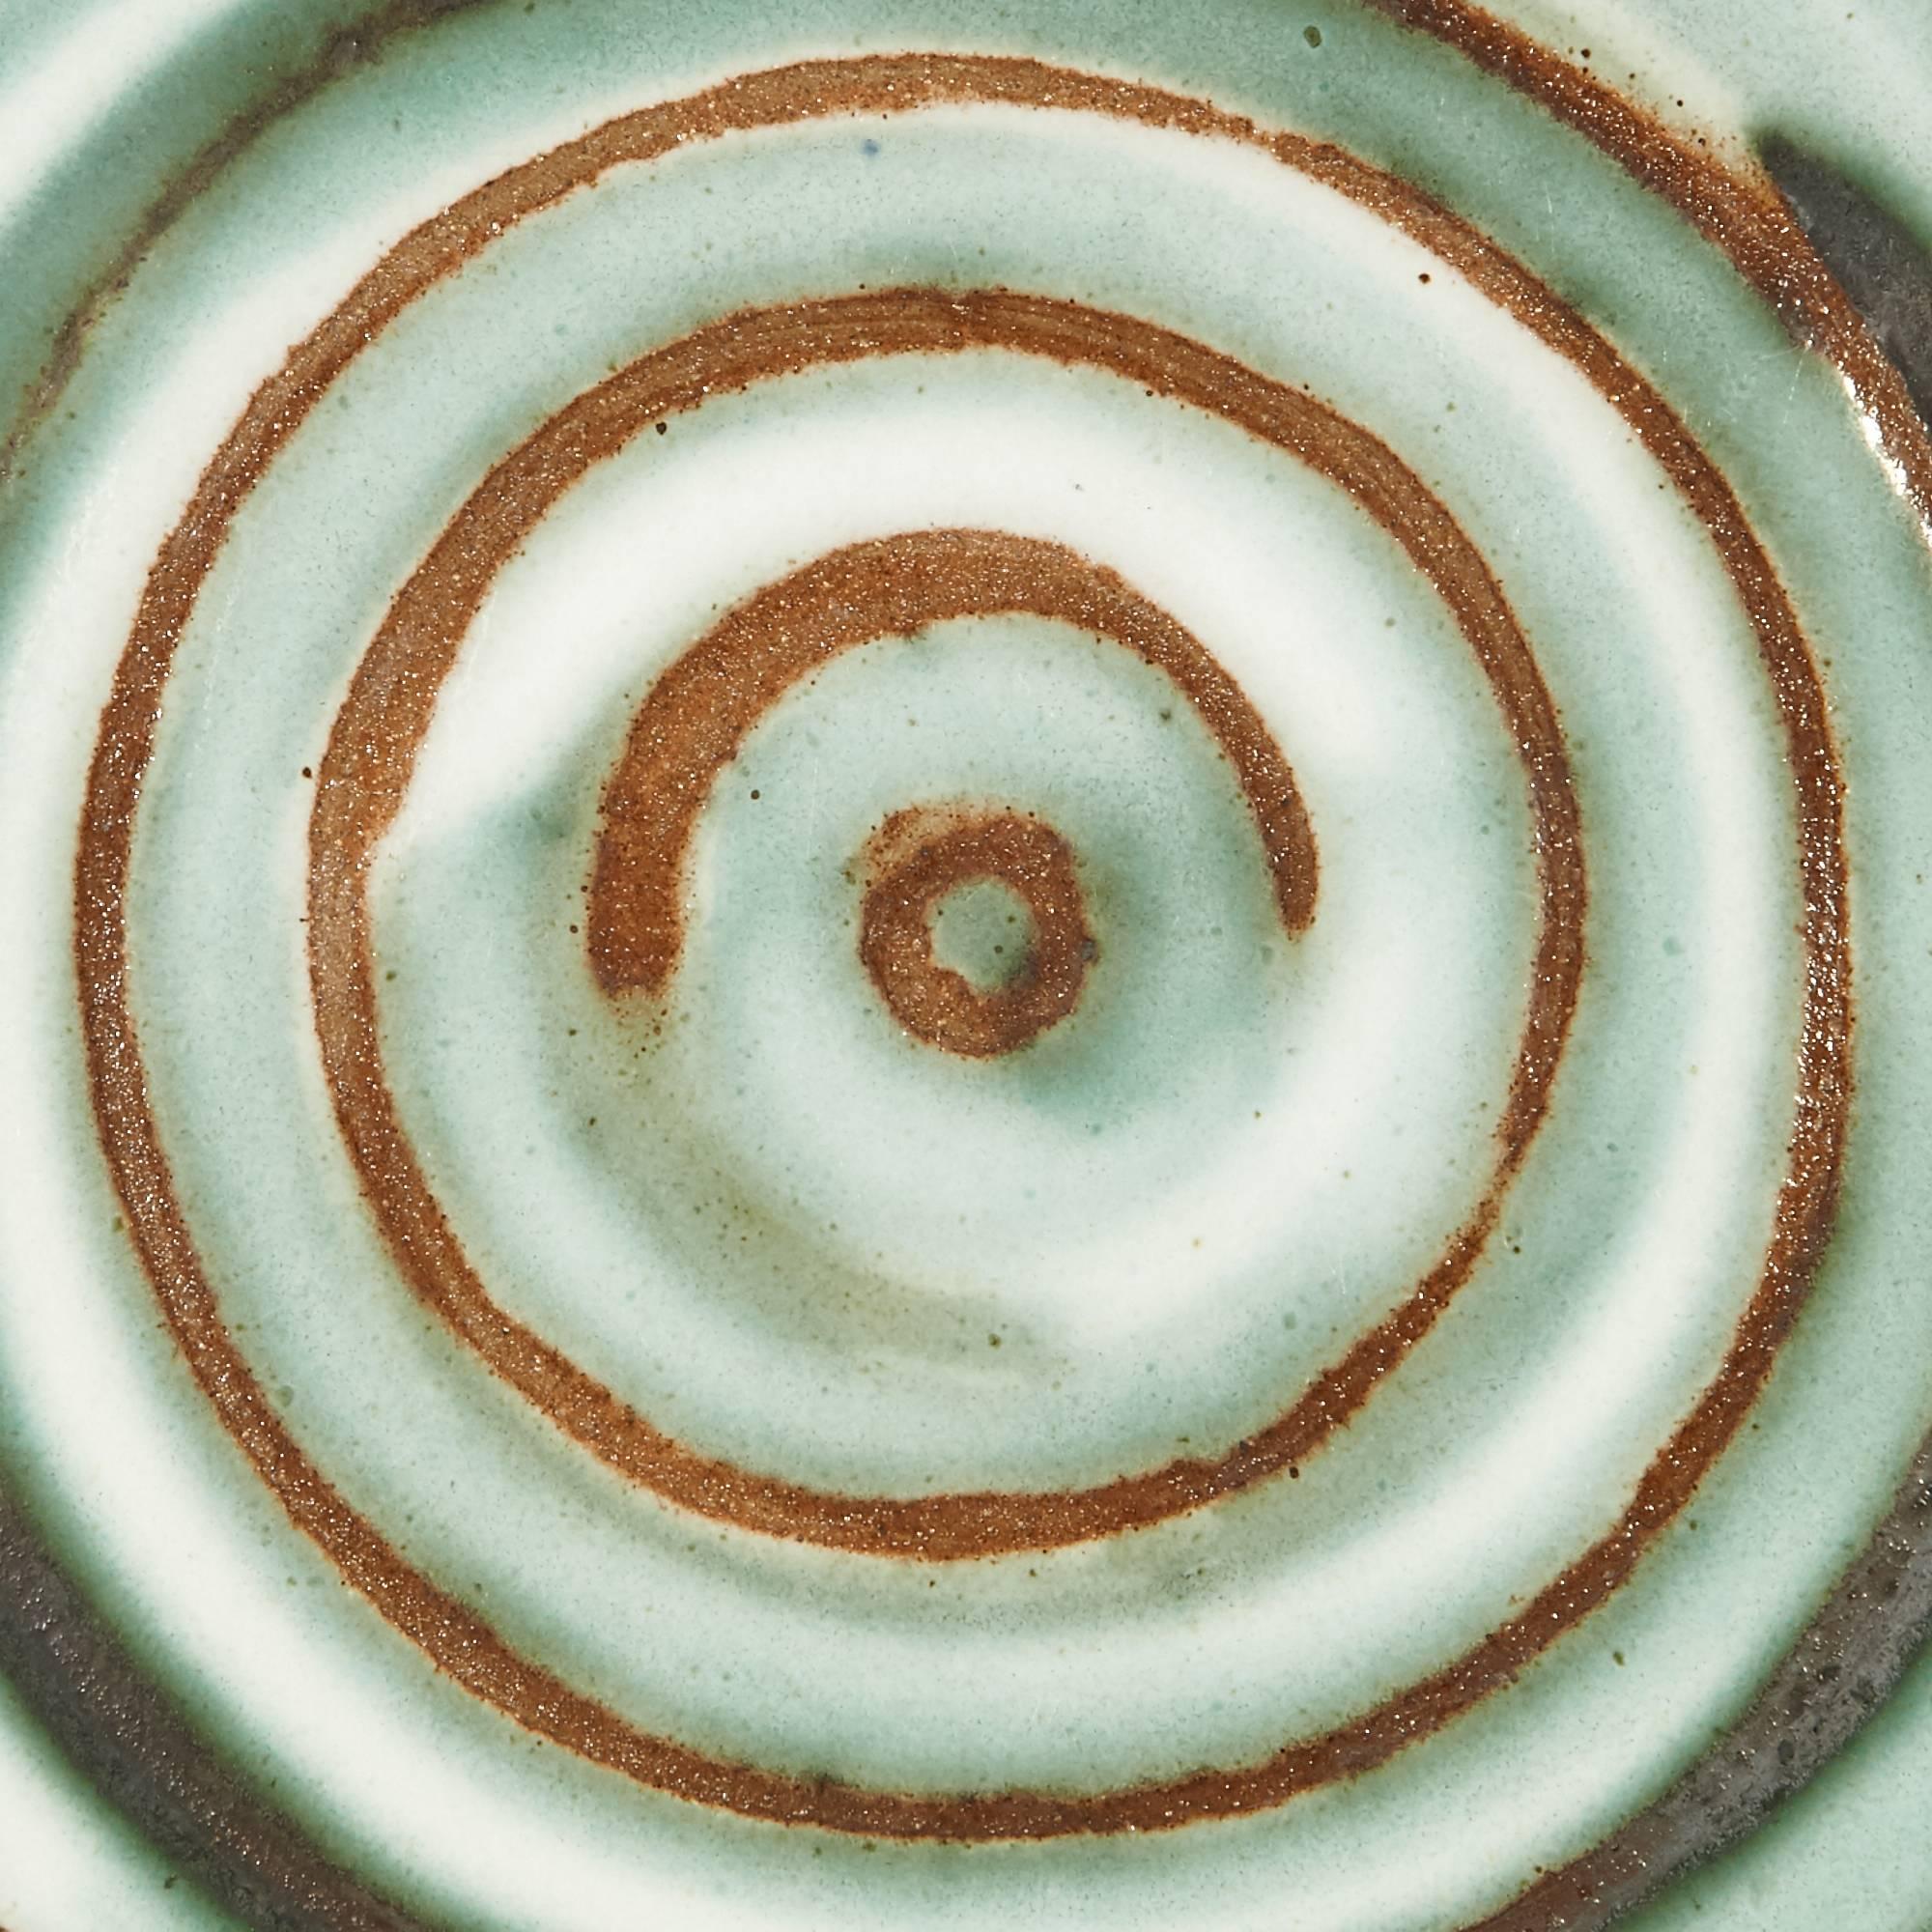 1960s ceramic serving plate in a swirl pattern designed by Gordon and Jane Martz for Marshall Studios. Marked.